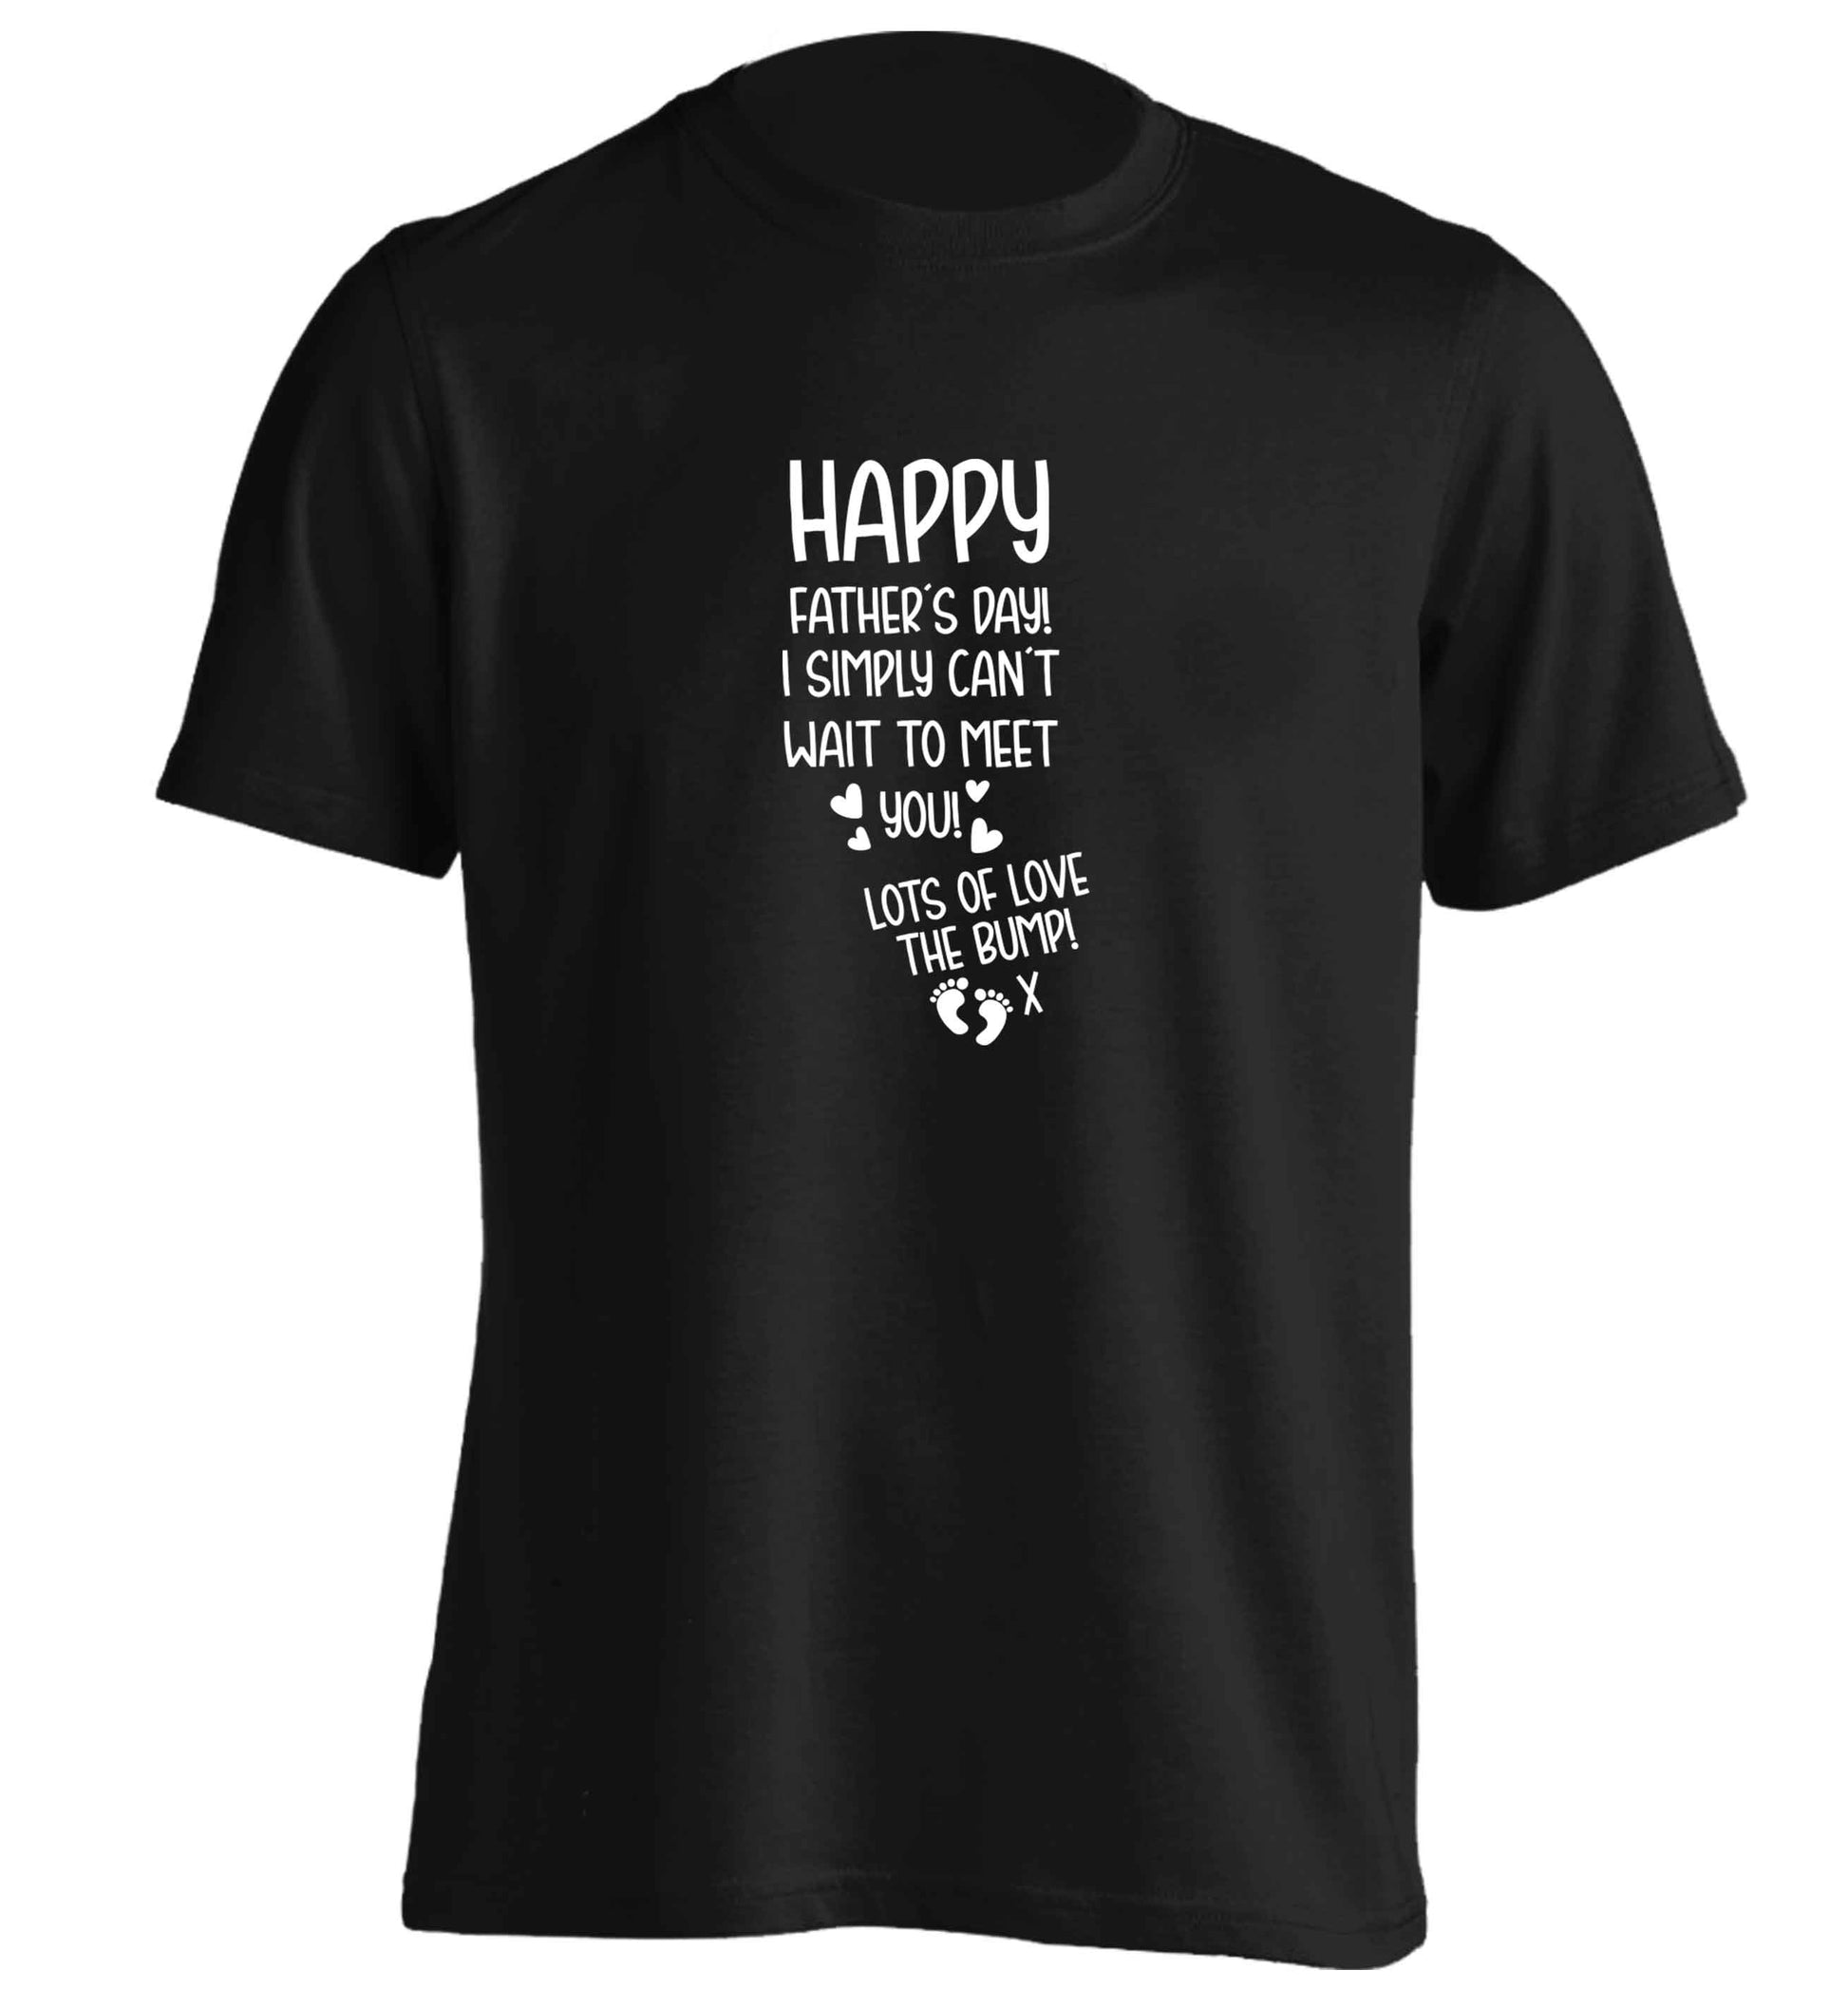 Happy Father's day daddy I can't wait to meet you lot's of love the bump! adults unisex black Tshirt 2XL